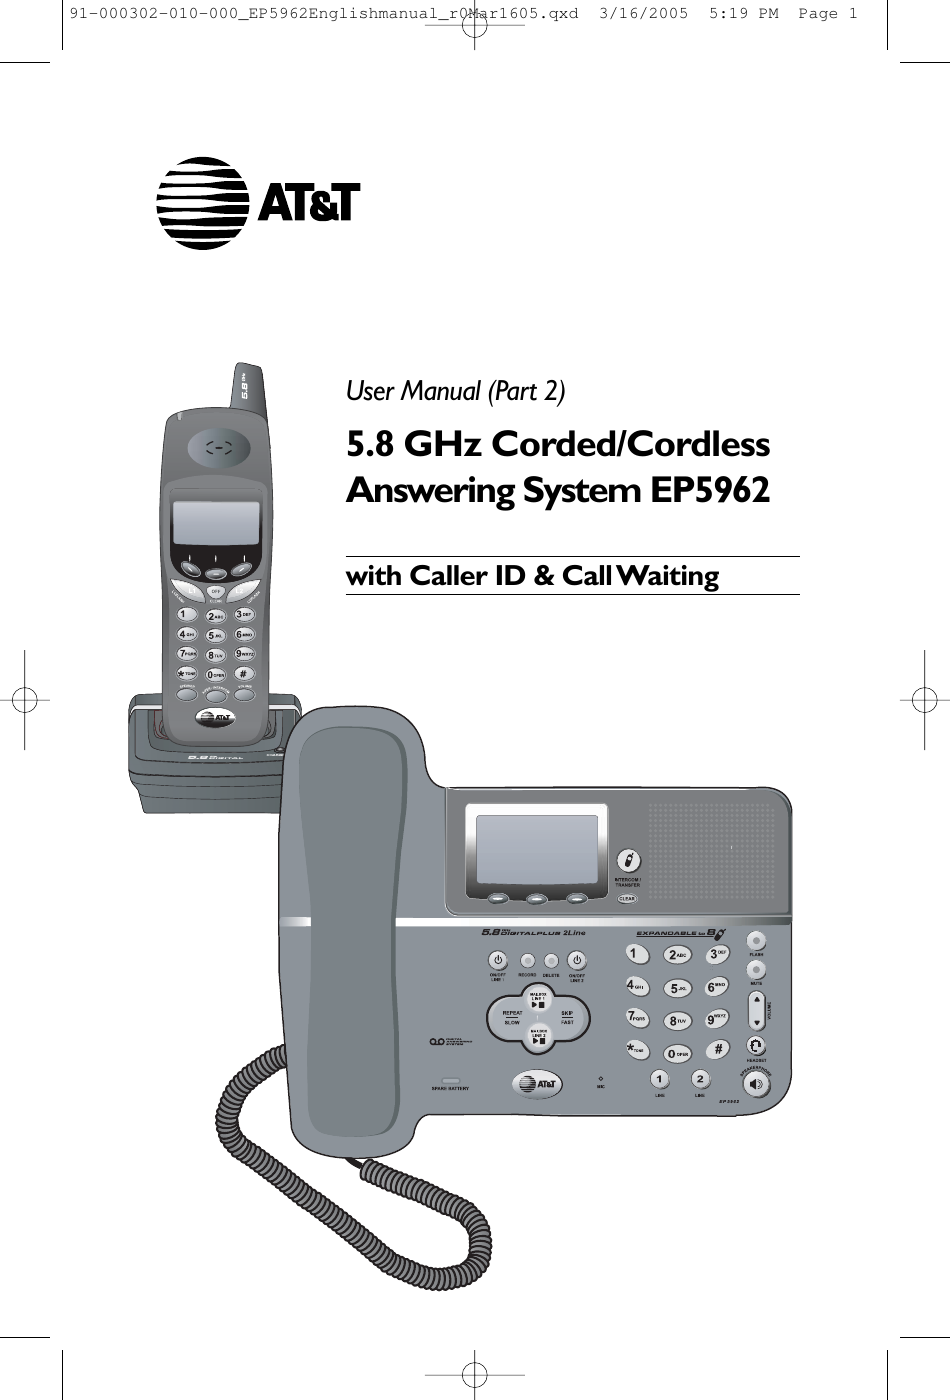  User Manual (Part 2)5.8 GHz Corded/Cordless Answering System EP5962with Caller ID &amp; Call Waiting91-000302-010-000_EP5962Englishmanual_r0Mar1605.qxd  3/16/2005  5:19 PM  Page 1